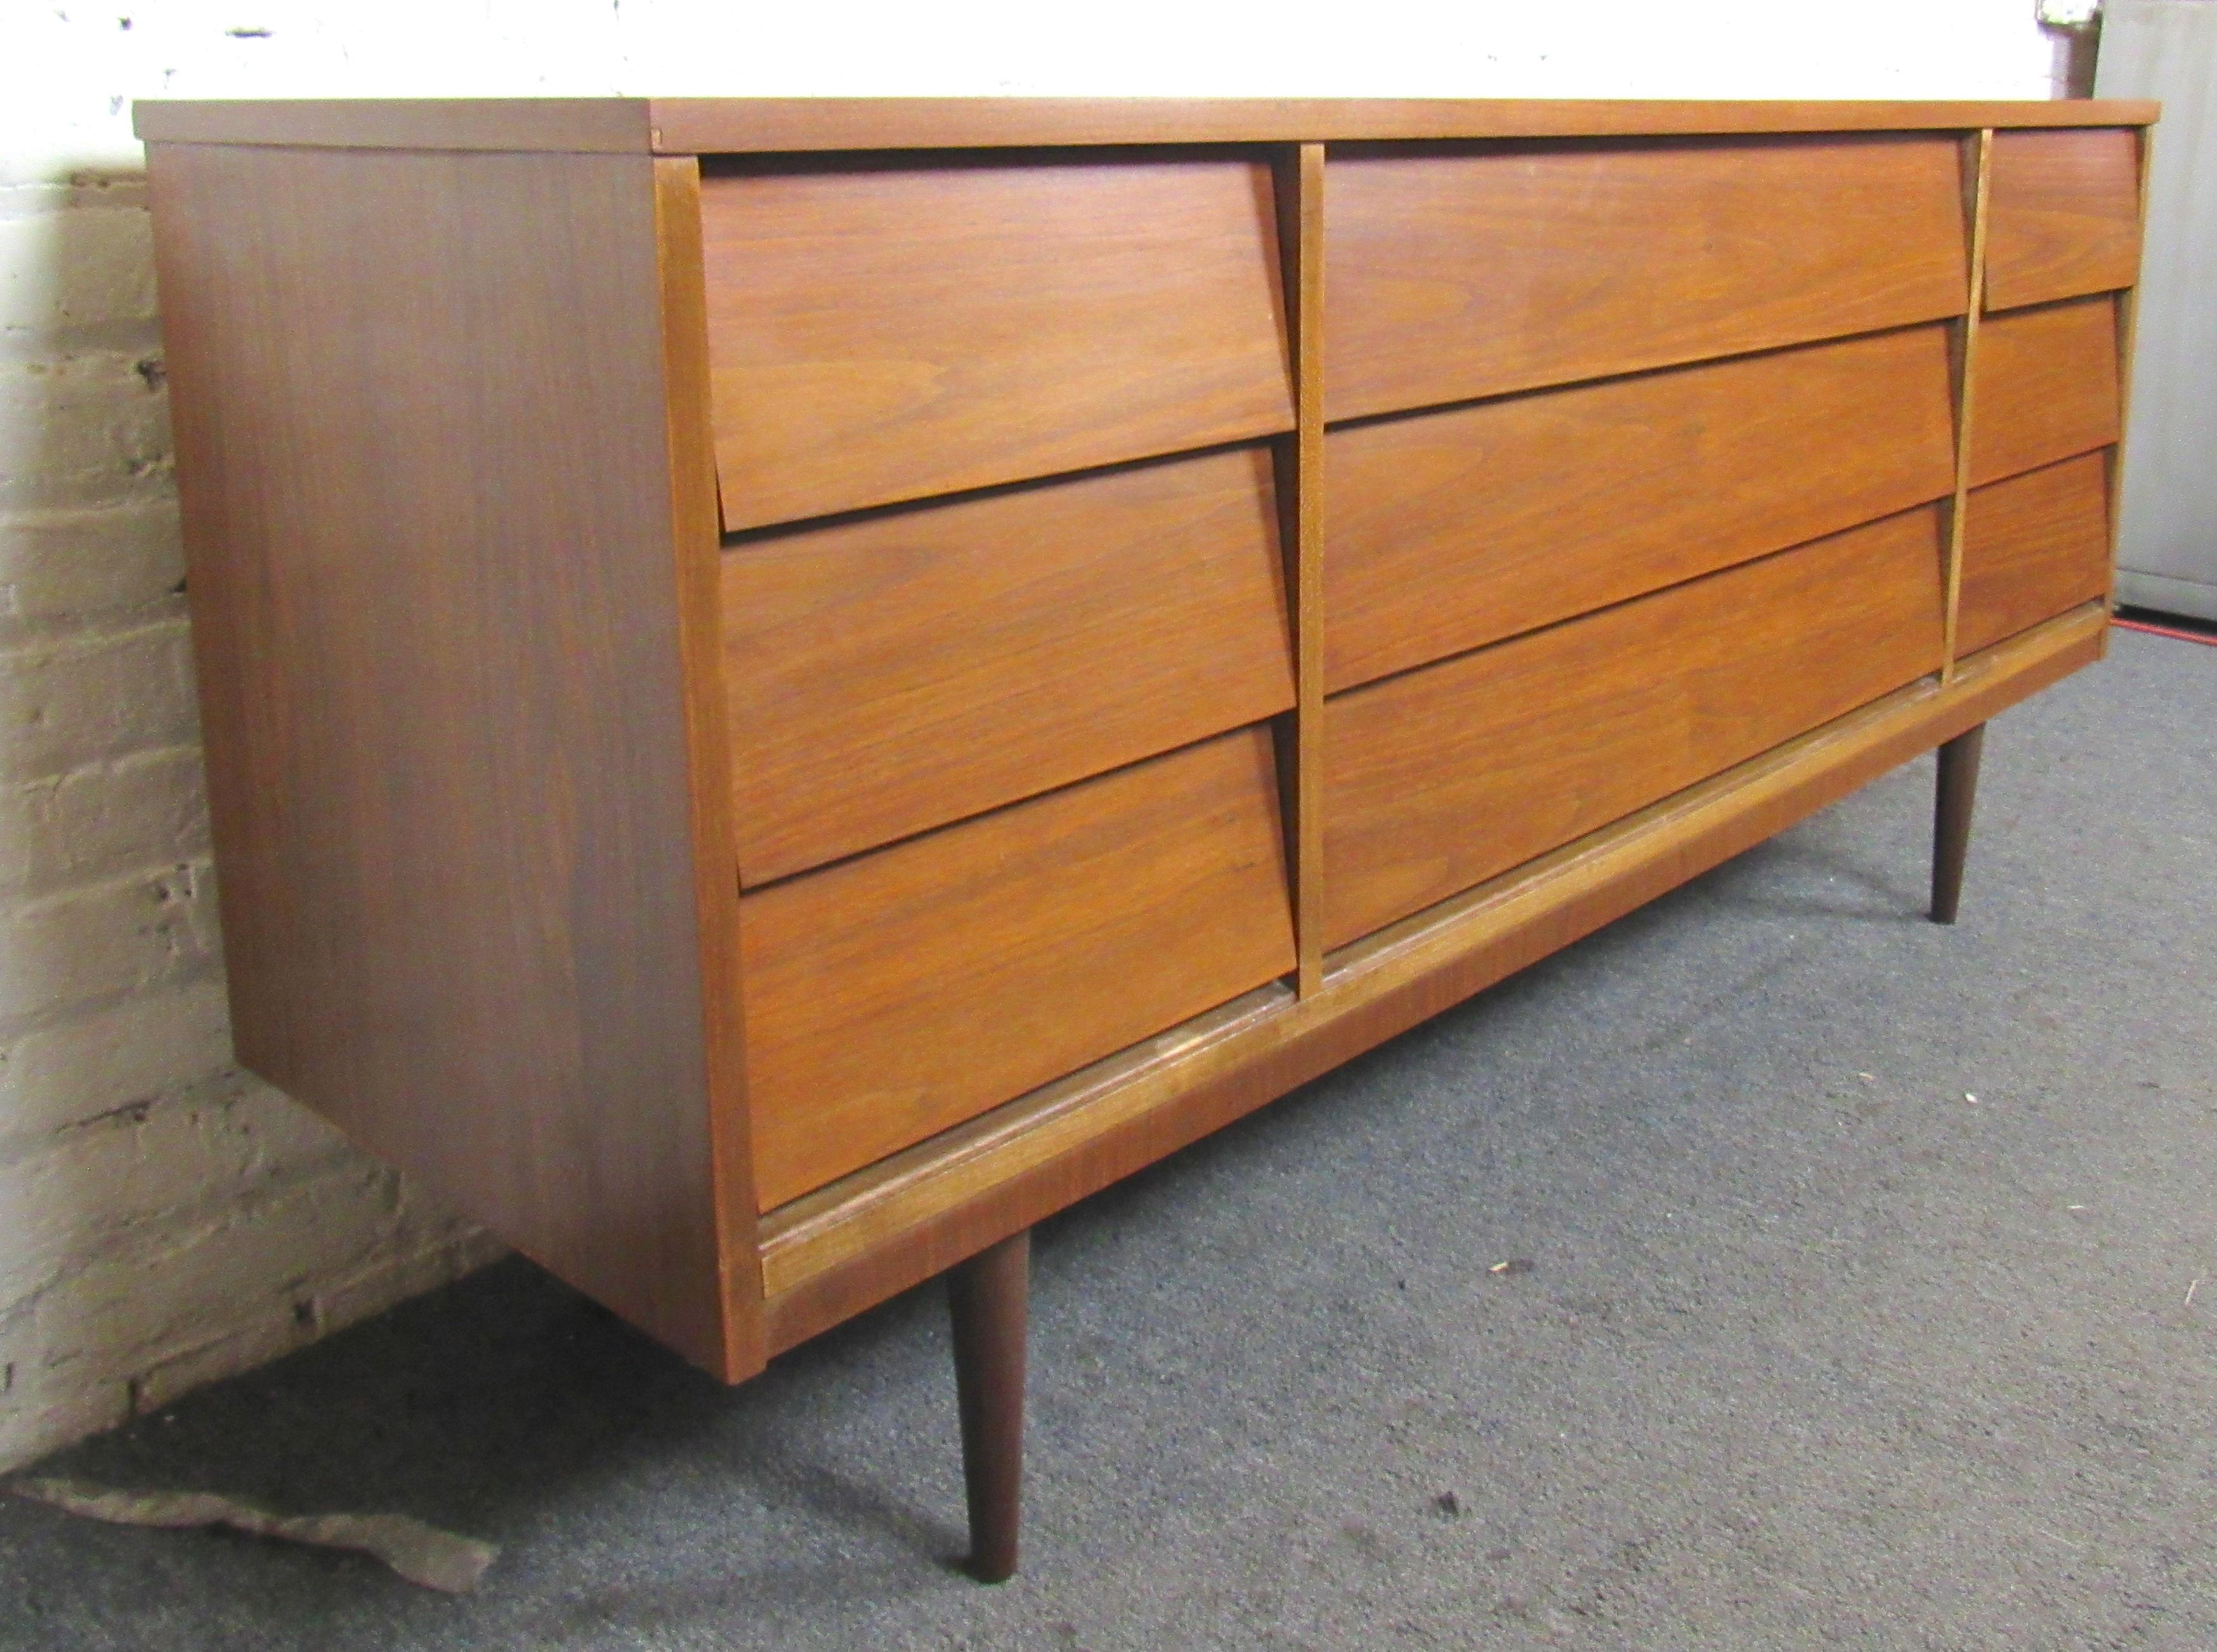 Long nine drawer dresser in walnut by Dixie. Simple mid-century modern lines with unique louvered drawers.
(Please confirm location NY of NJ).